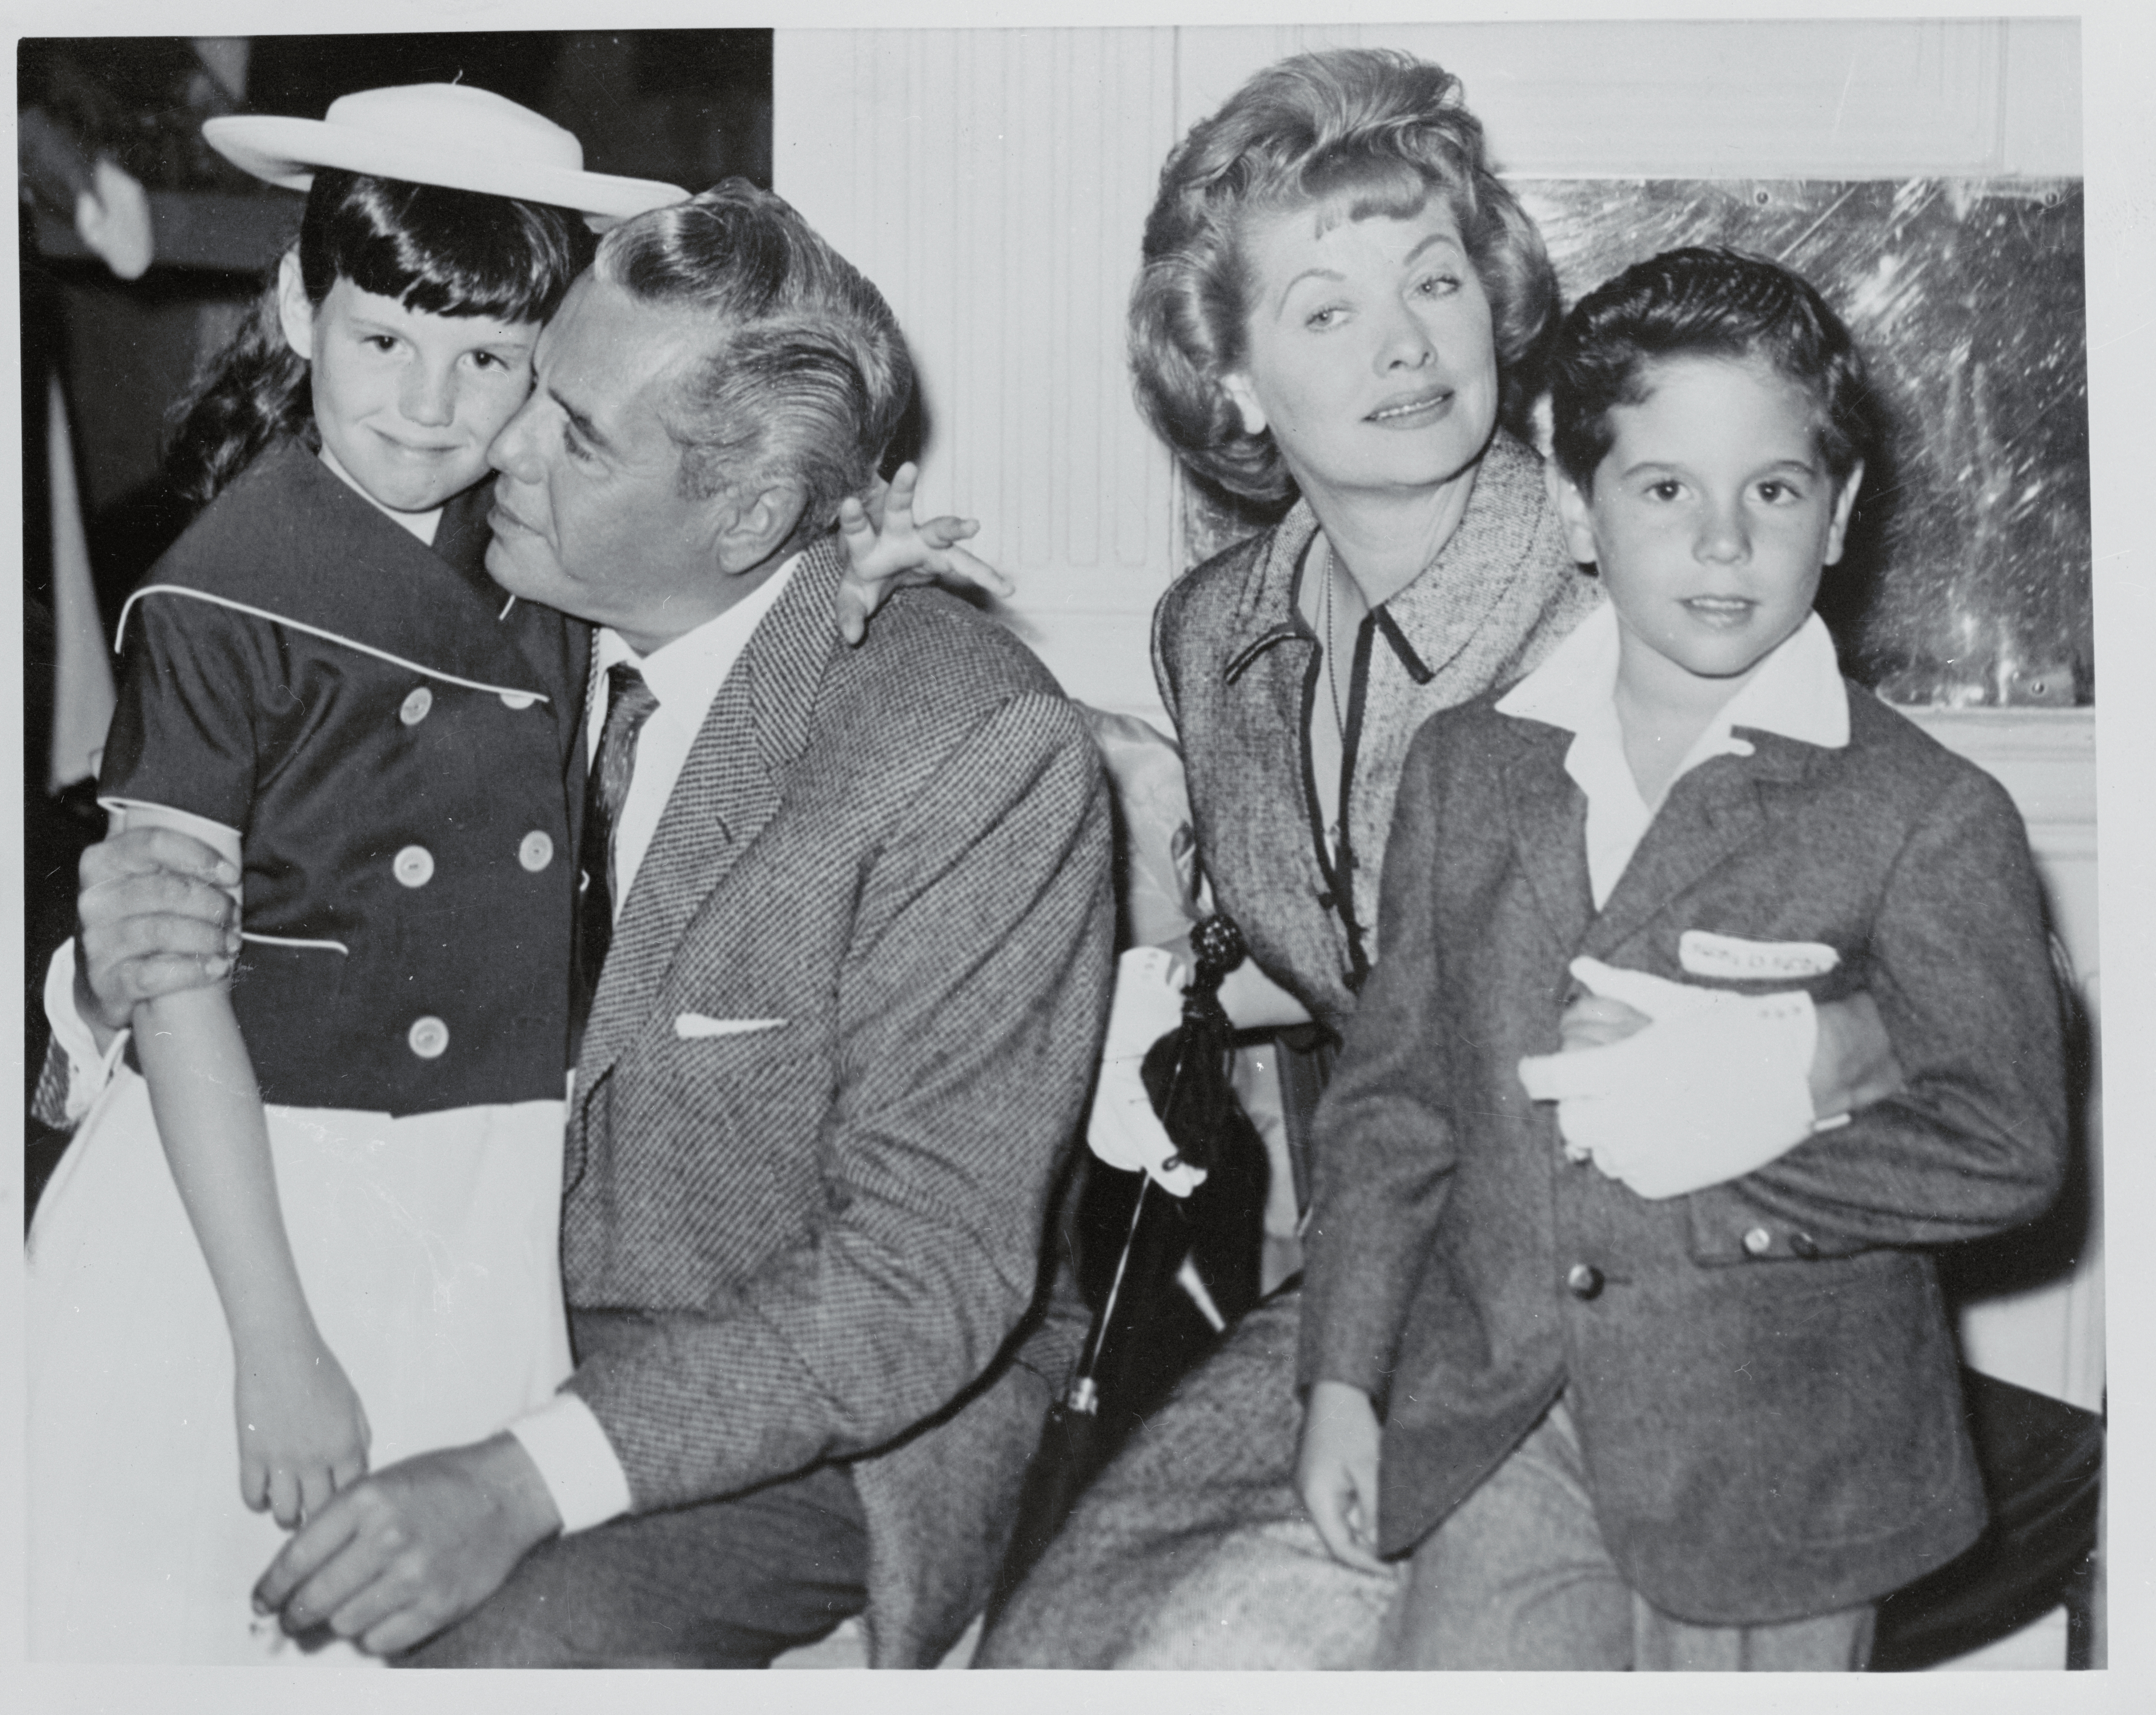 Desi Arnaz and Lucille Ball with their children, Desi Arnaz Jr. and Lucie Arnaz | Source: Getty Images